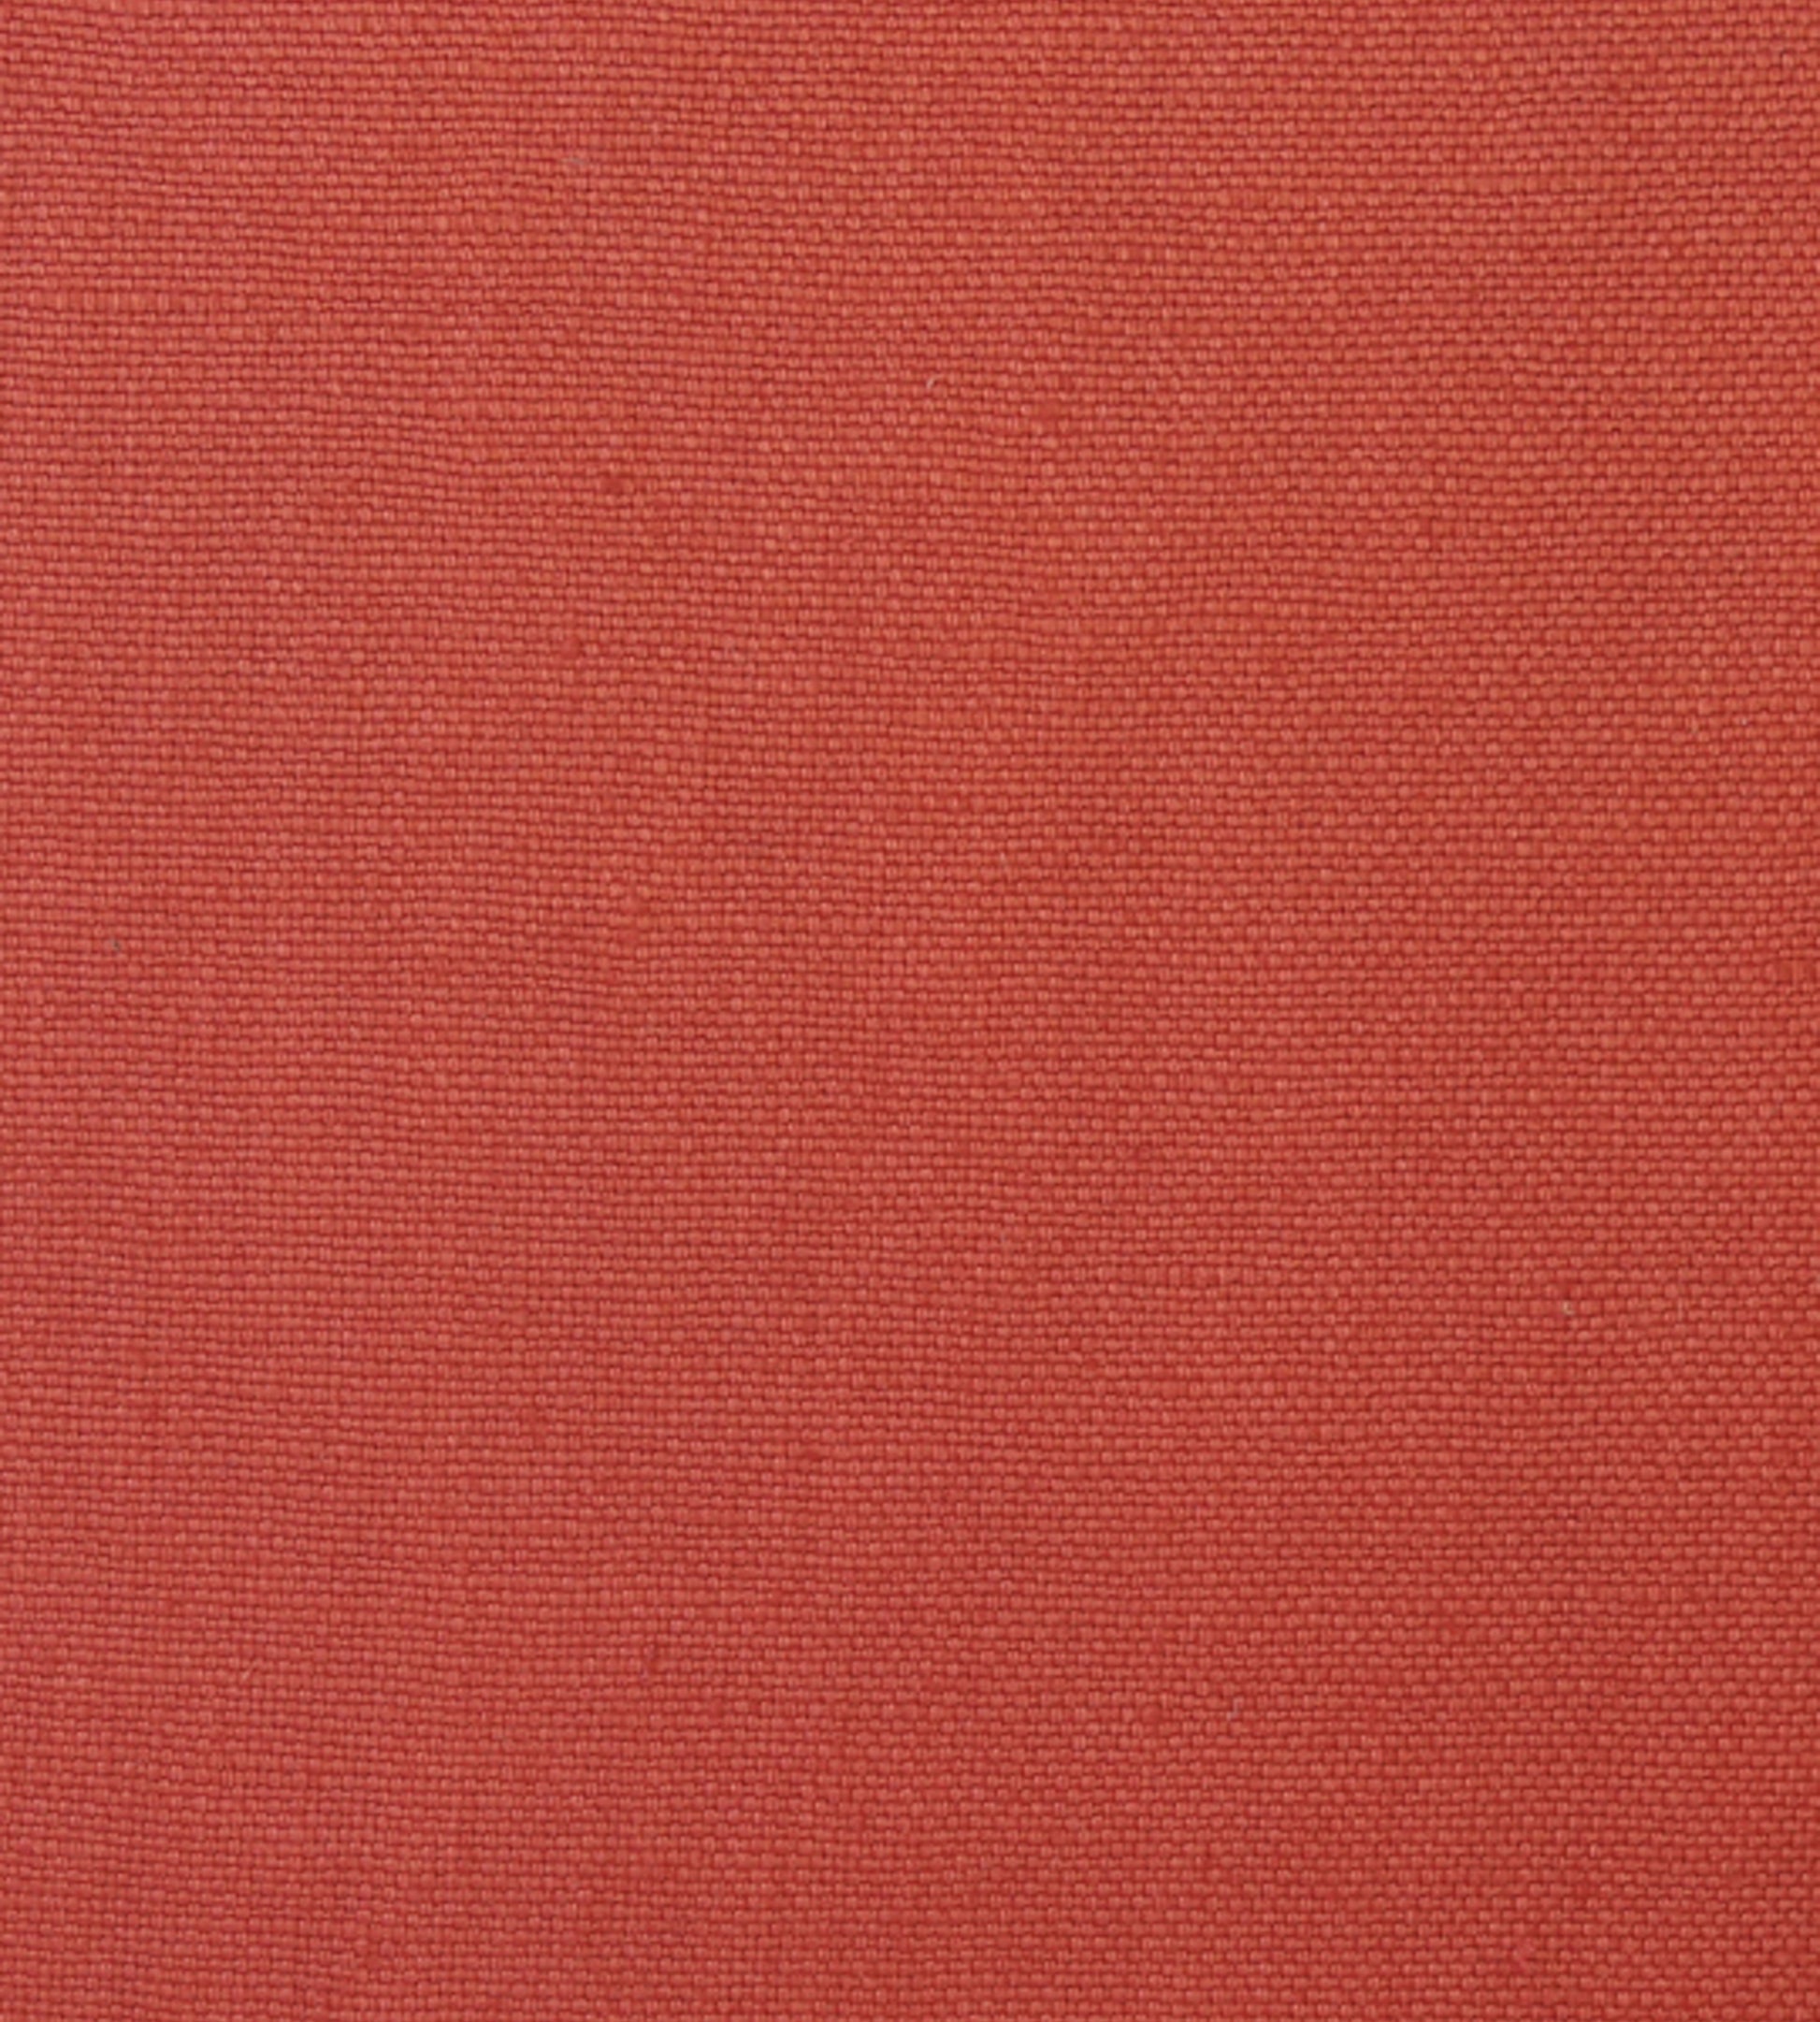 Purchase Scalamandre Fabric Product SC 002827108, Toscana Linen Coral 1